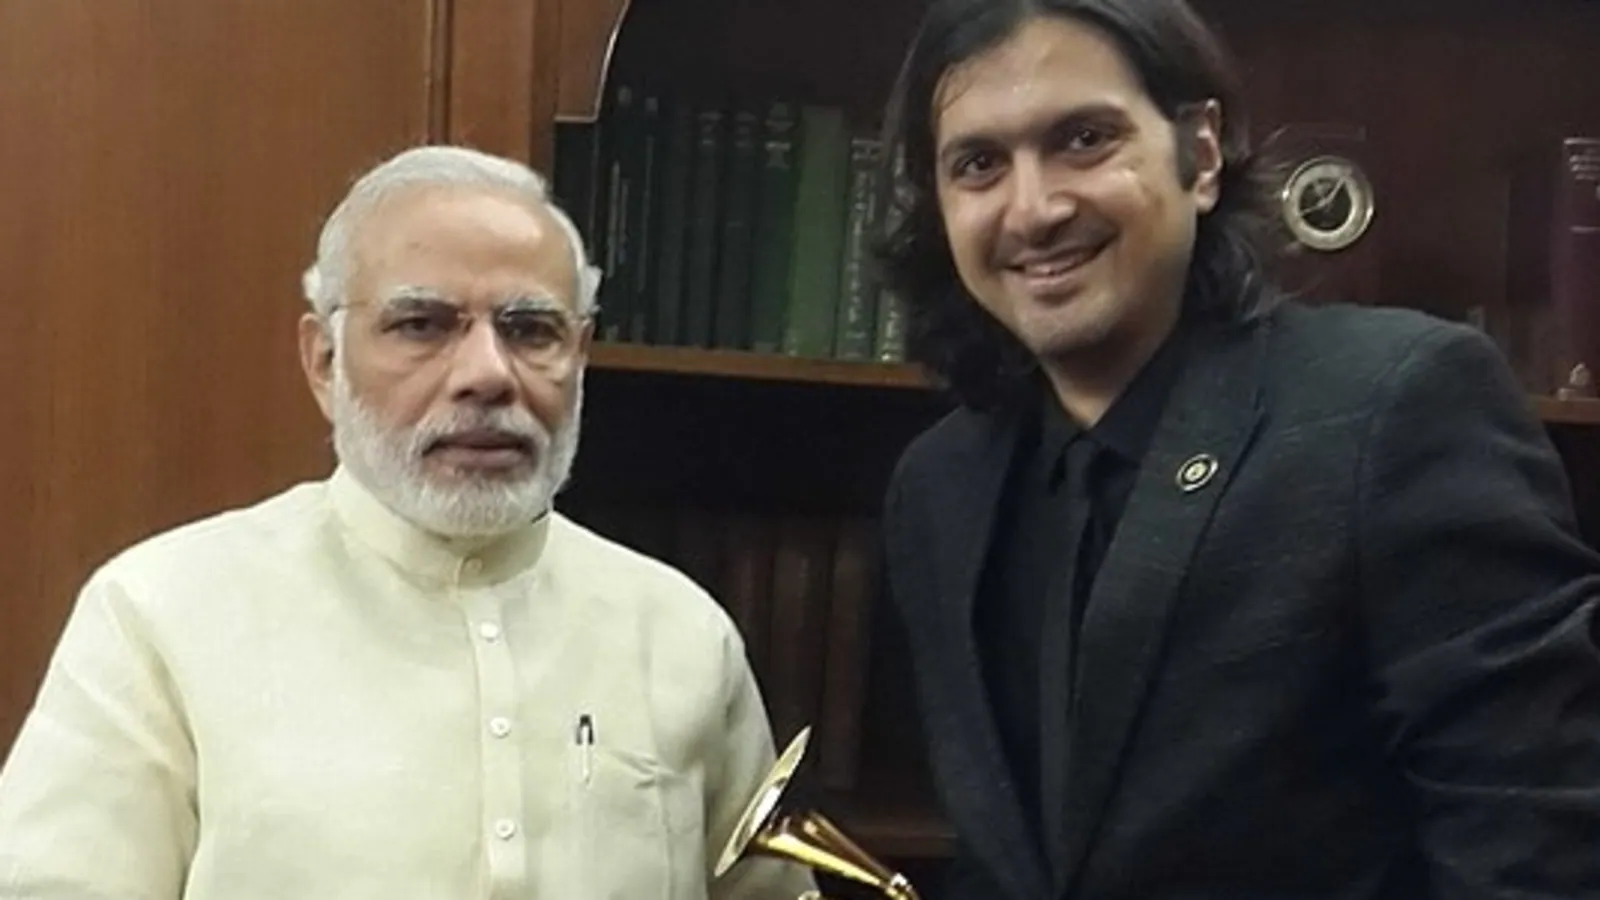 Ricky Kej gets praise from Prime Minister Narendra Modi after second Grammy win: ‘Congratulations for remarkable feat’